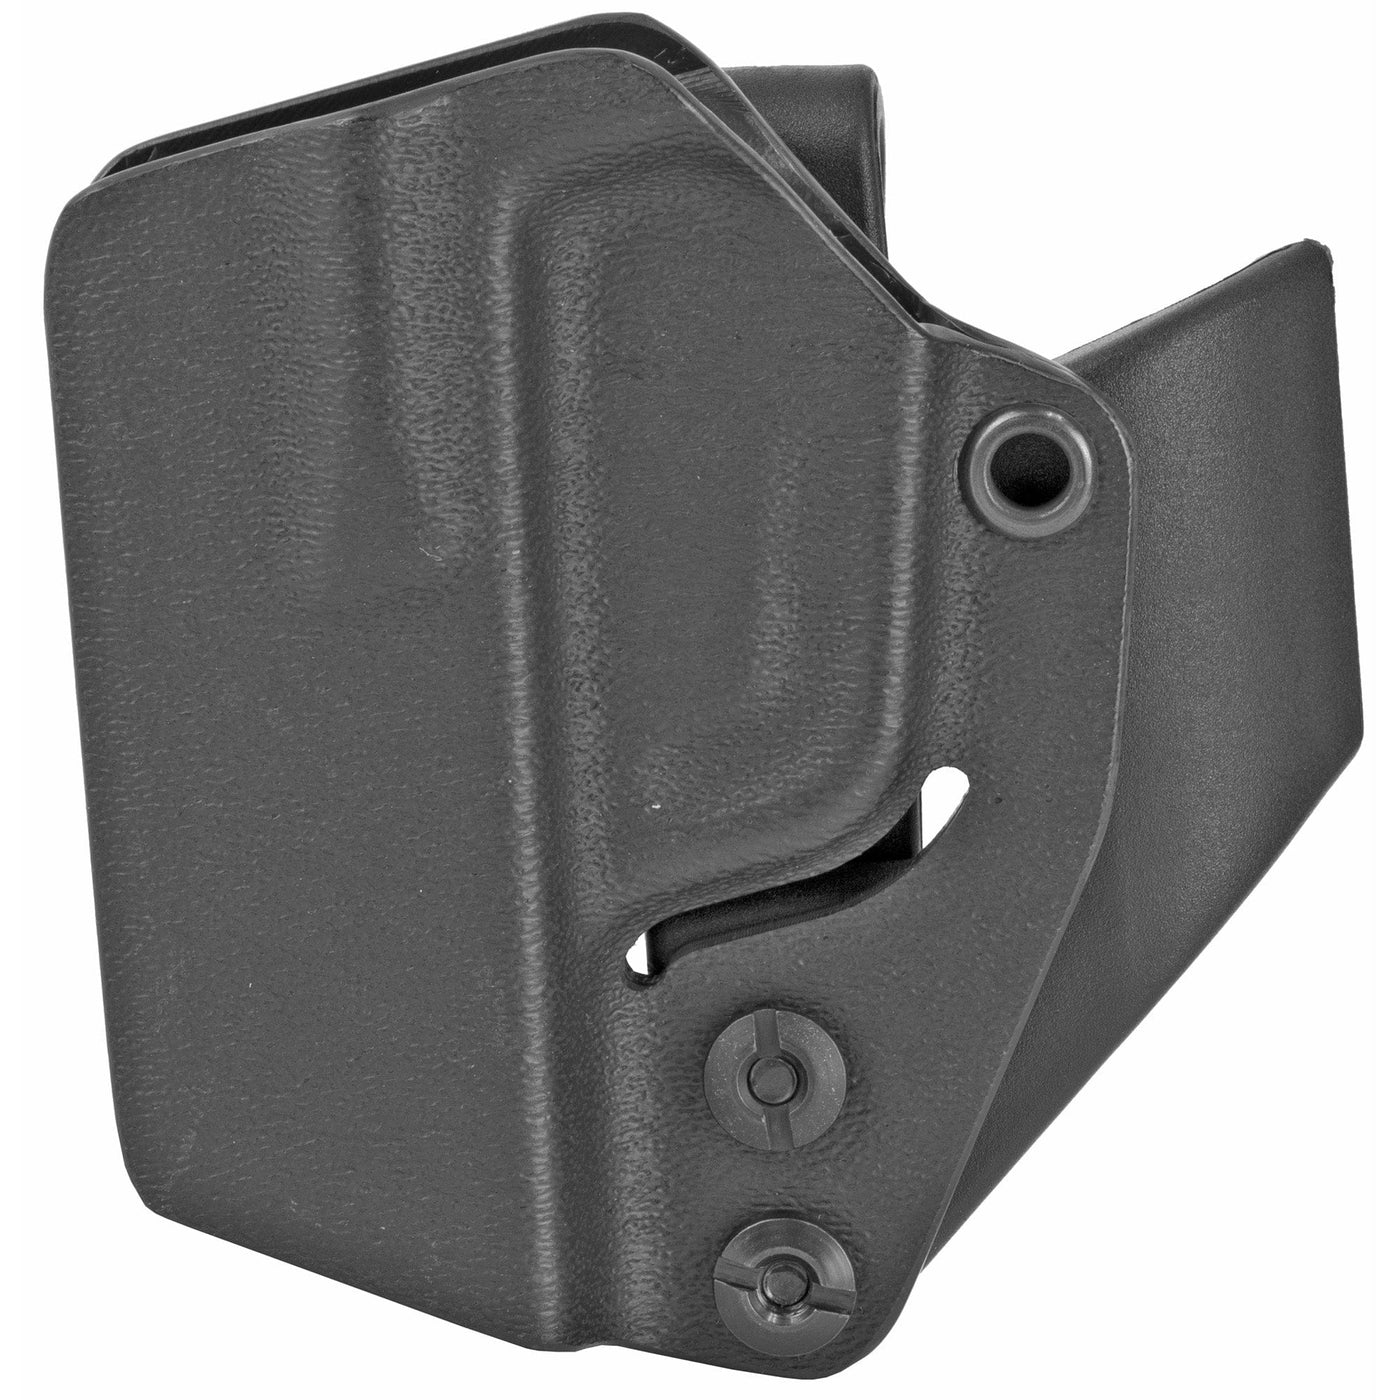 Mission First Tactical Mft Minimalist Hlstr Holsters